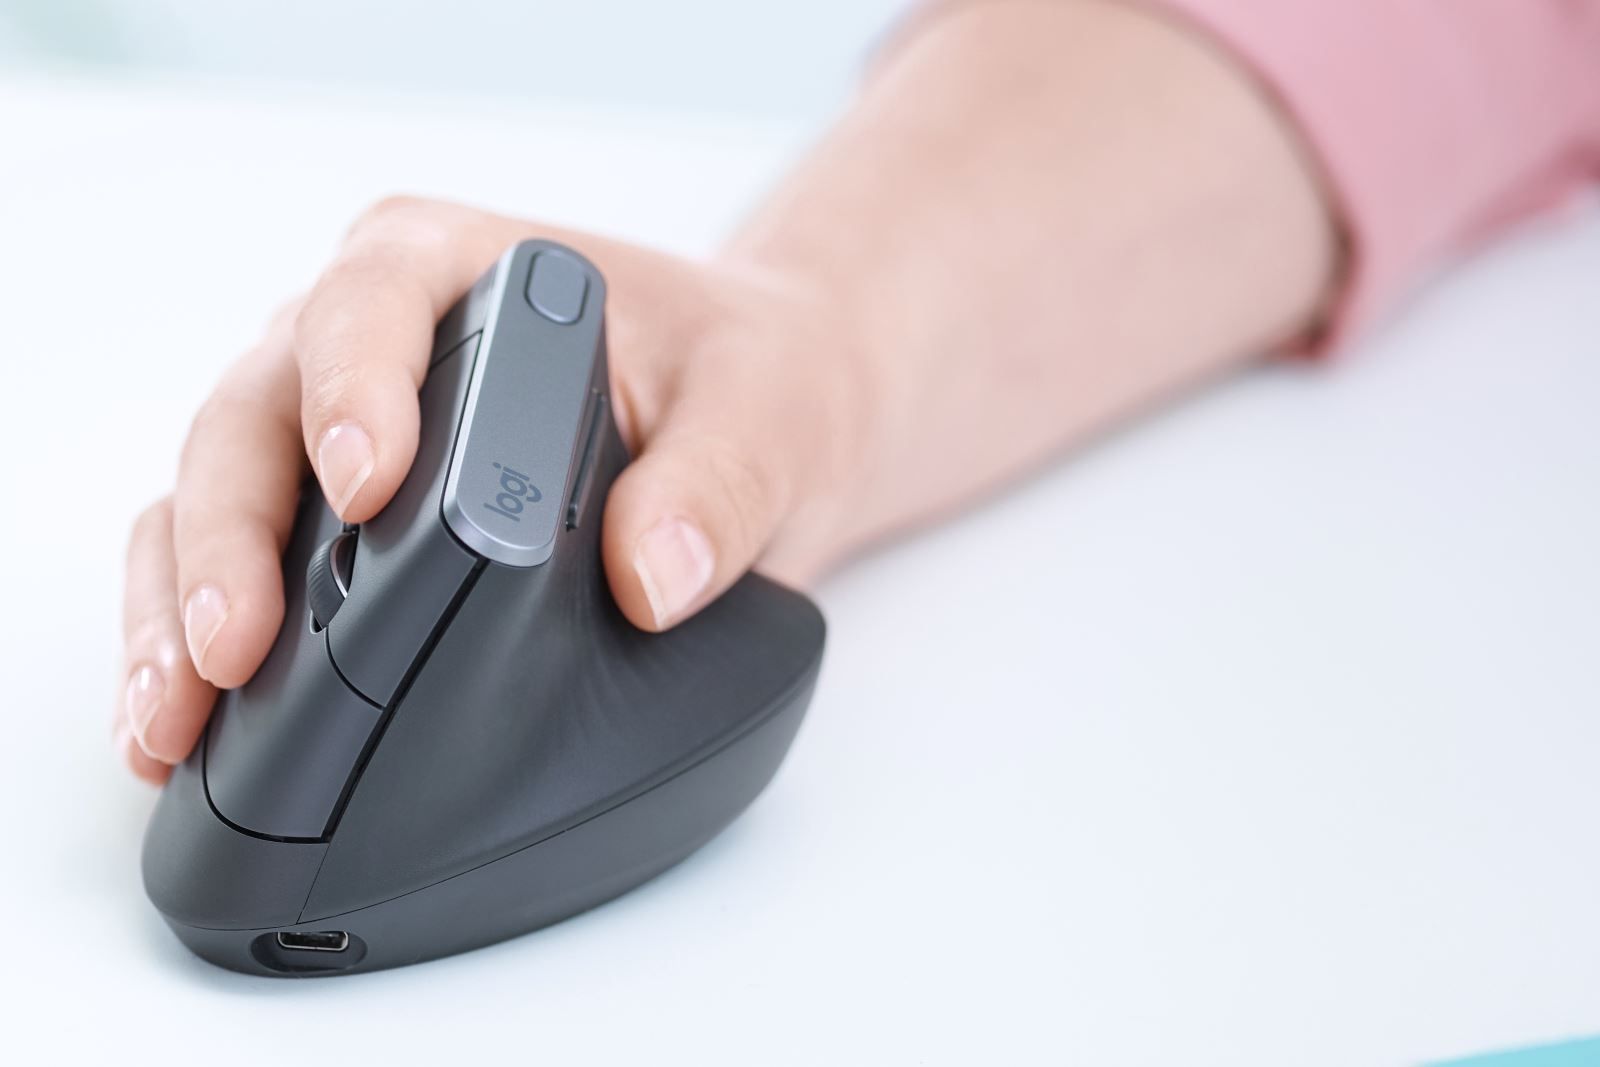 Logitechs latest mouse is designed to solve mouse wrist image 2